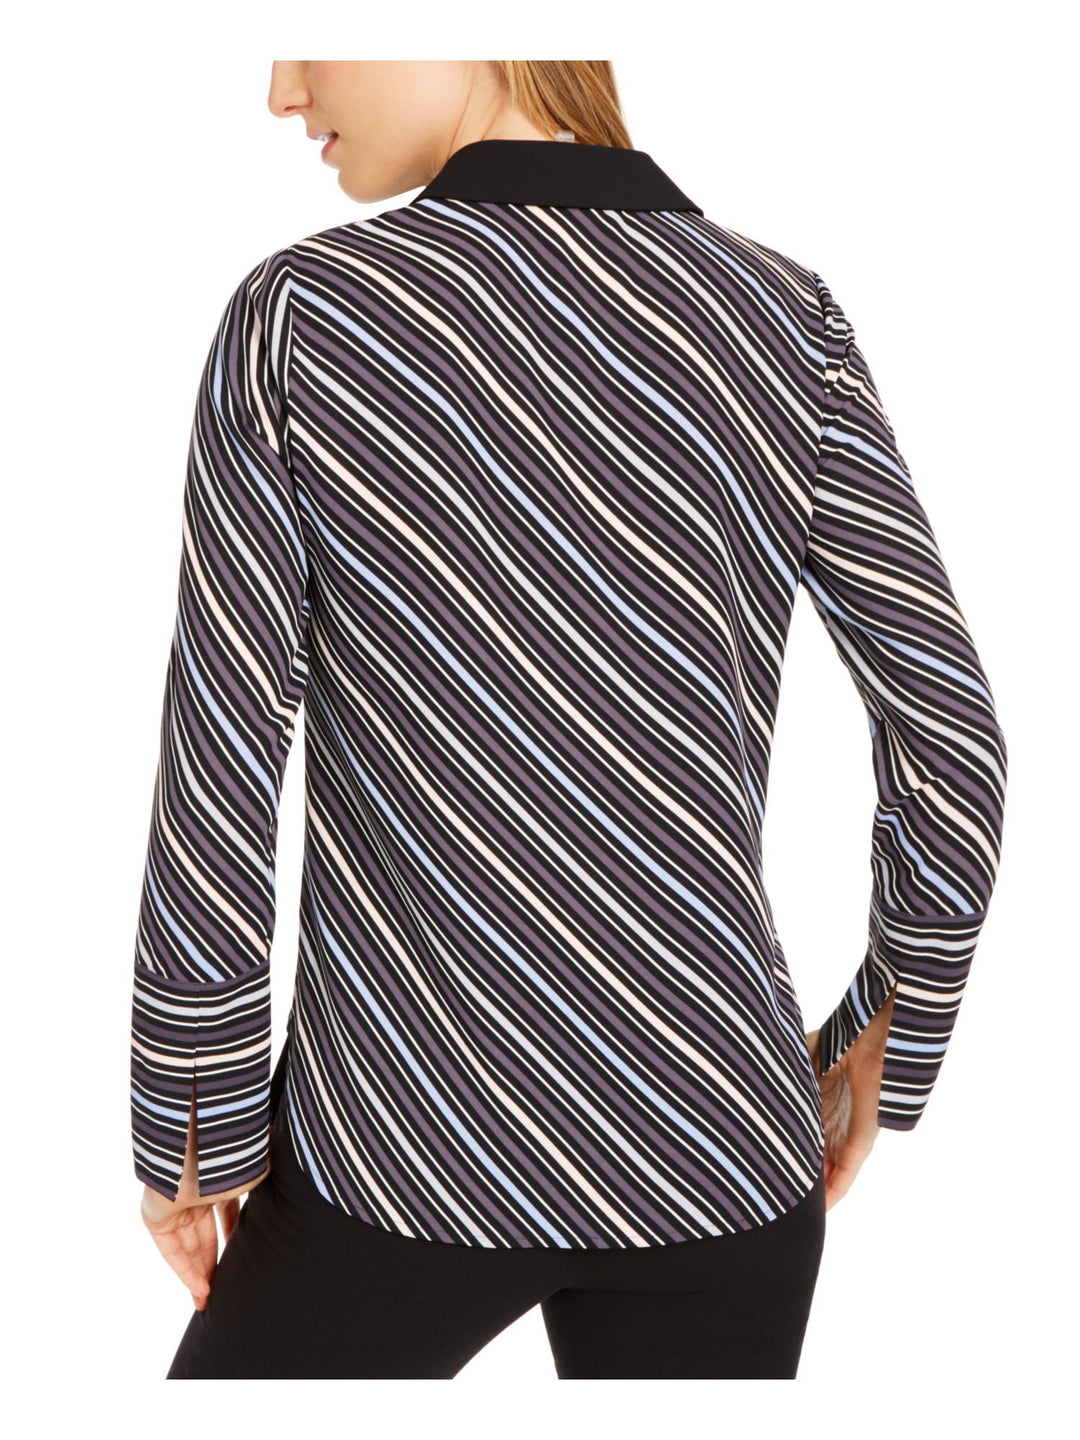 Anne Klein Women's Striped Long Sleeve Collared Top Gray Size X-Small